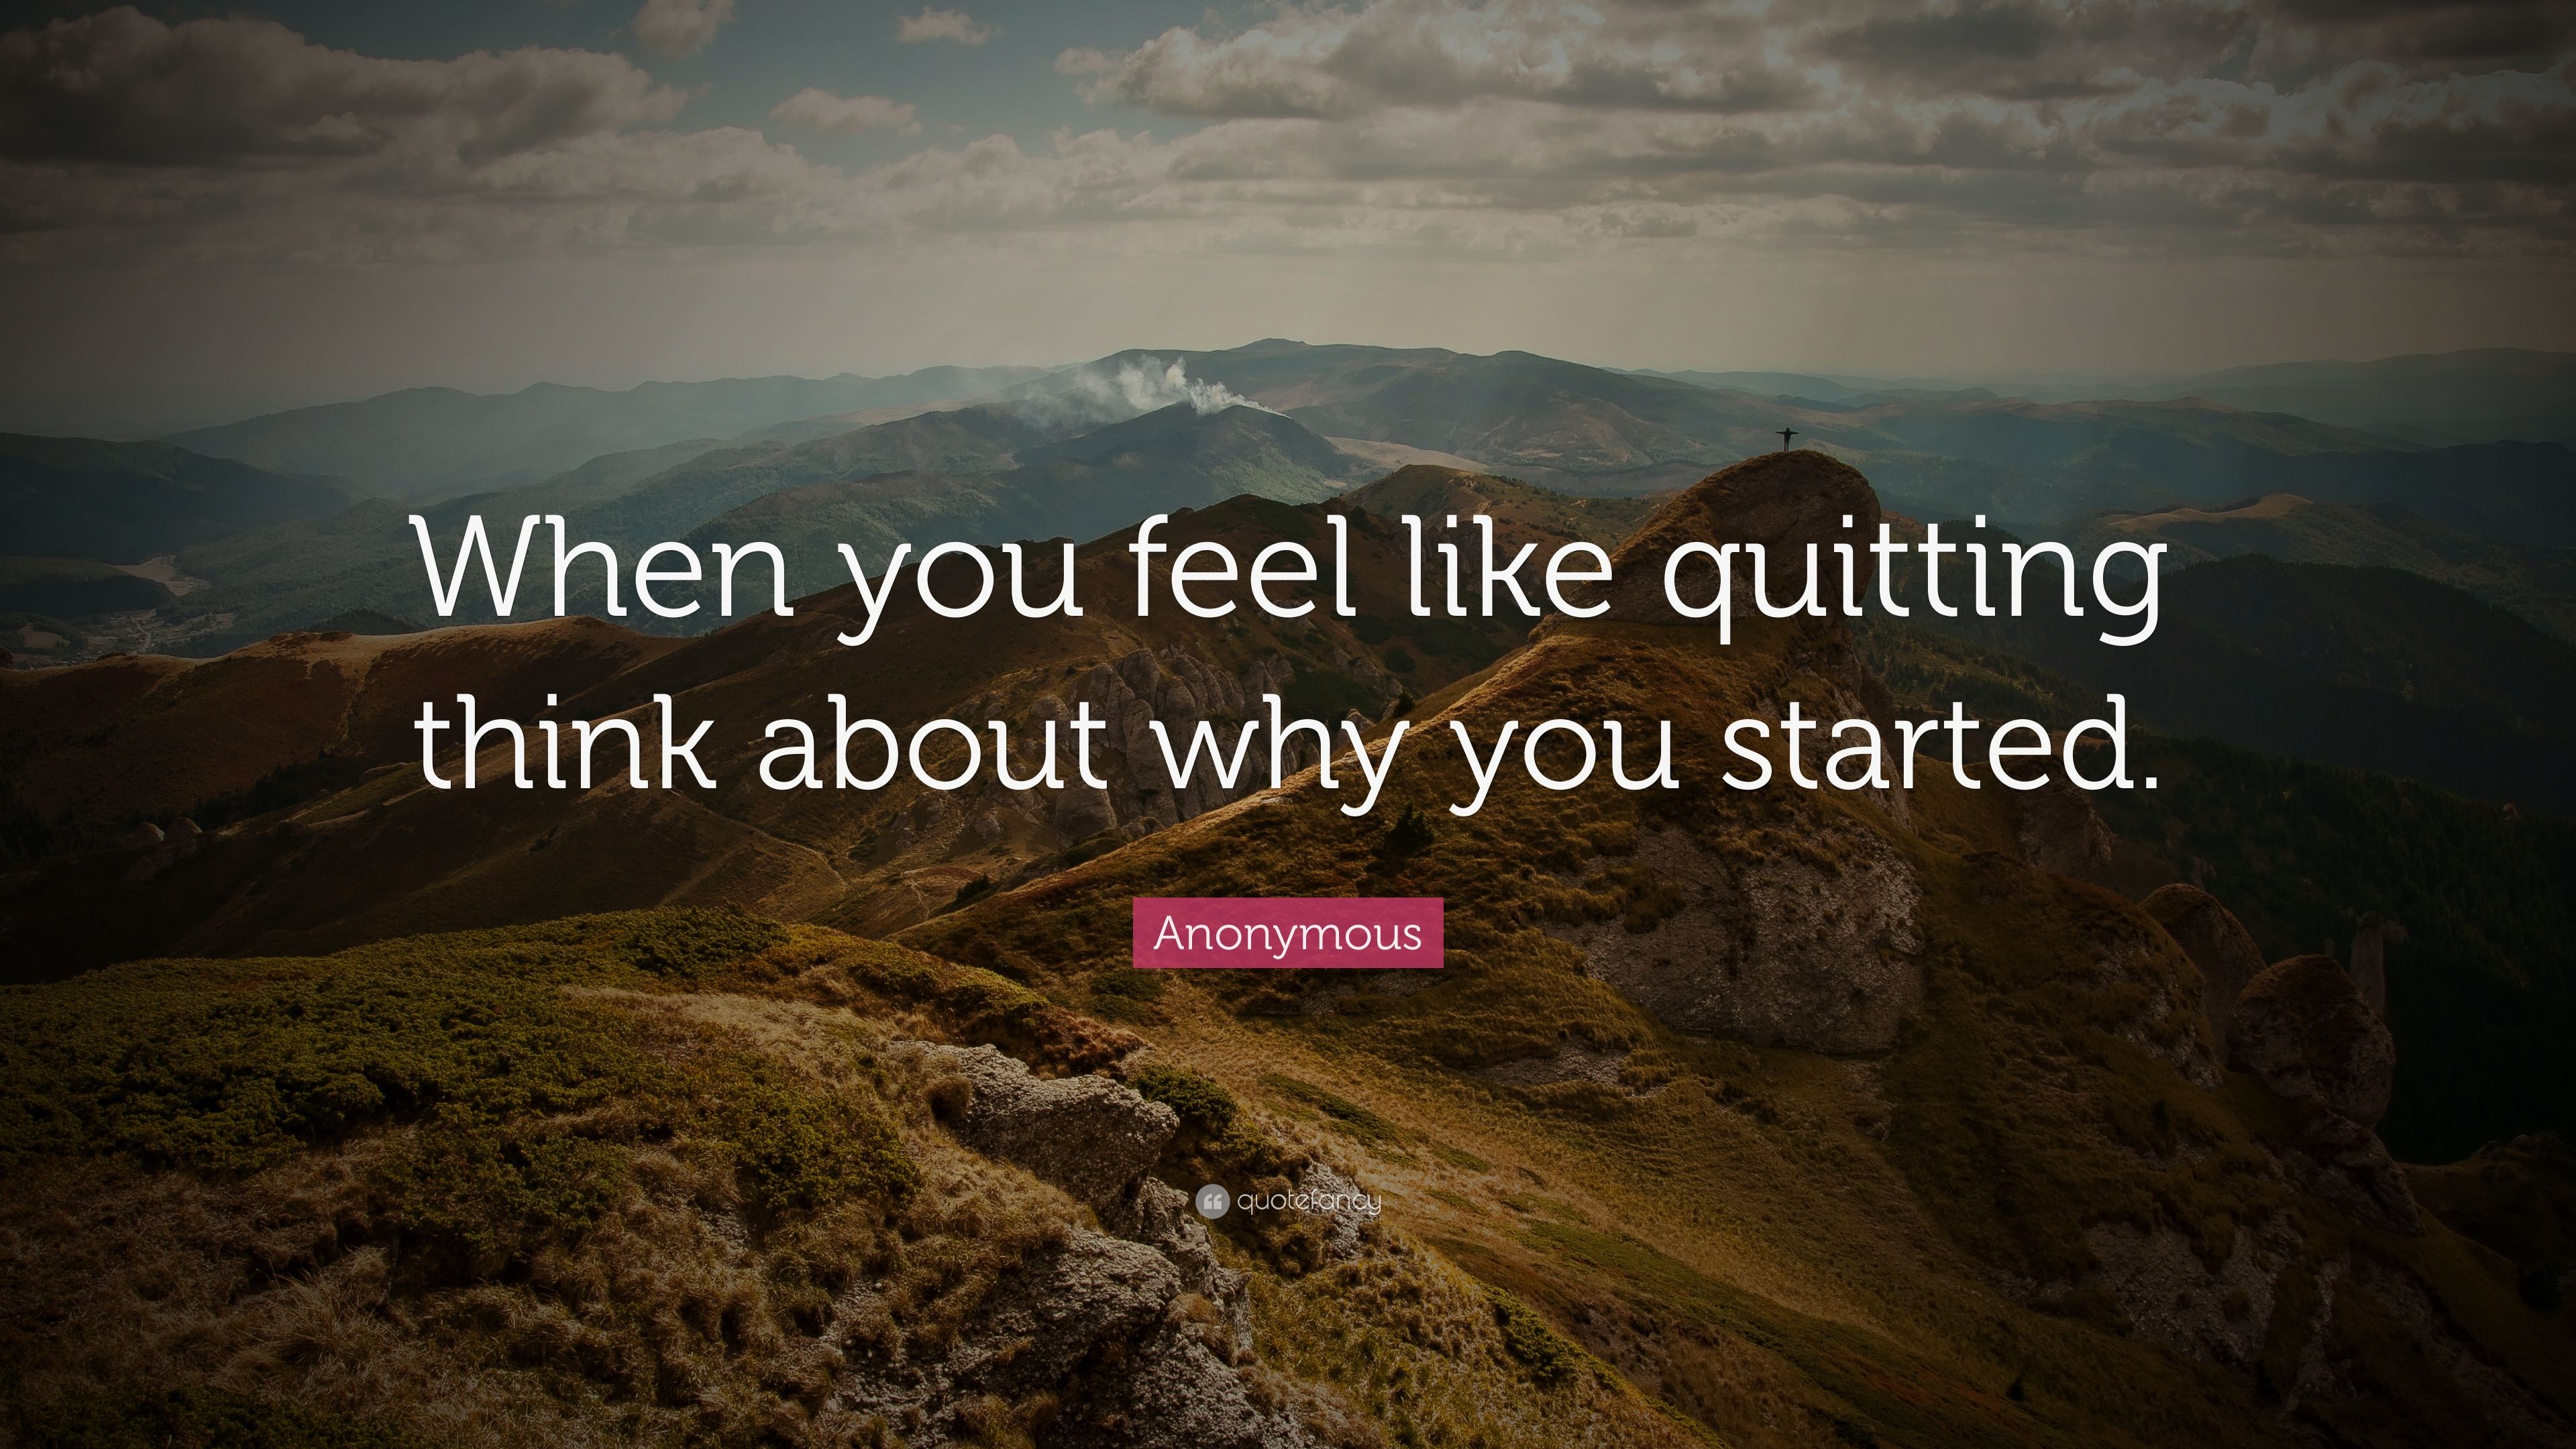 Anonymous Quote: “When you feel like quitting think about why you started.”